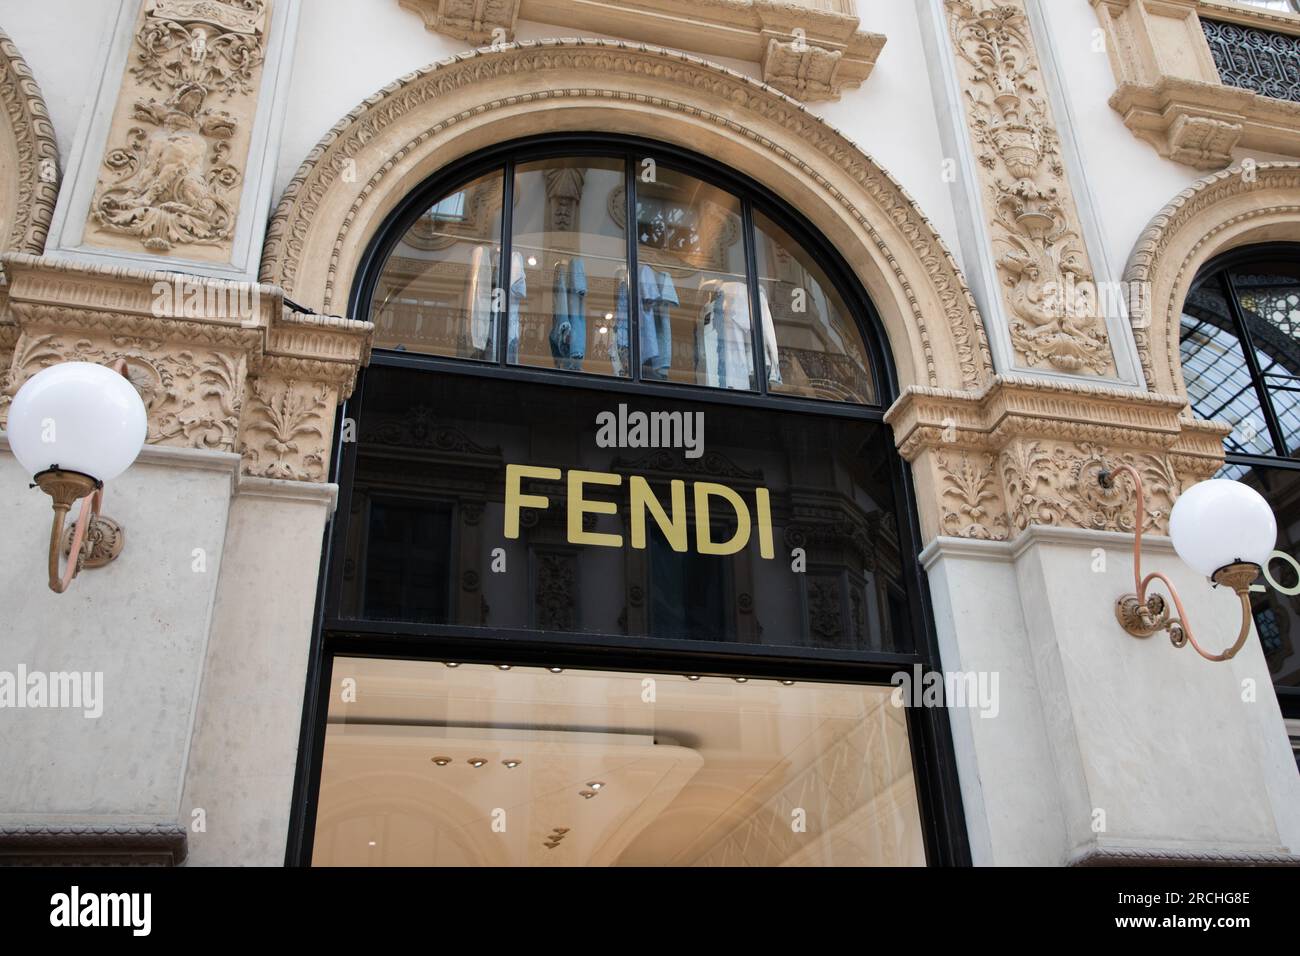 Milan , Italy - 07 10 2023 : Fendi logo sign and brand text on